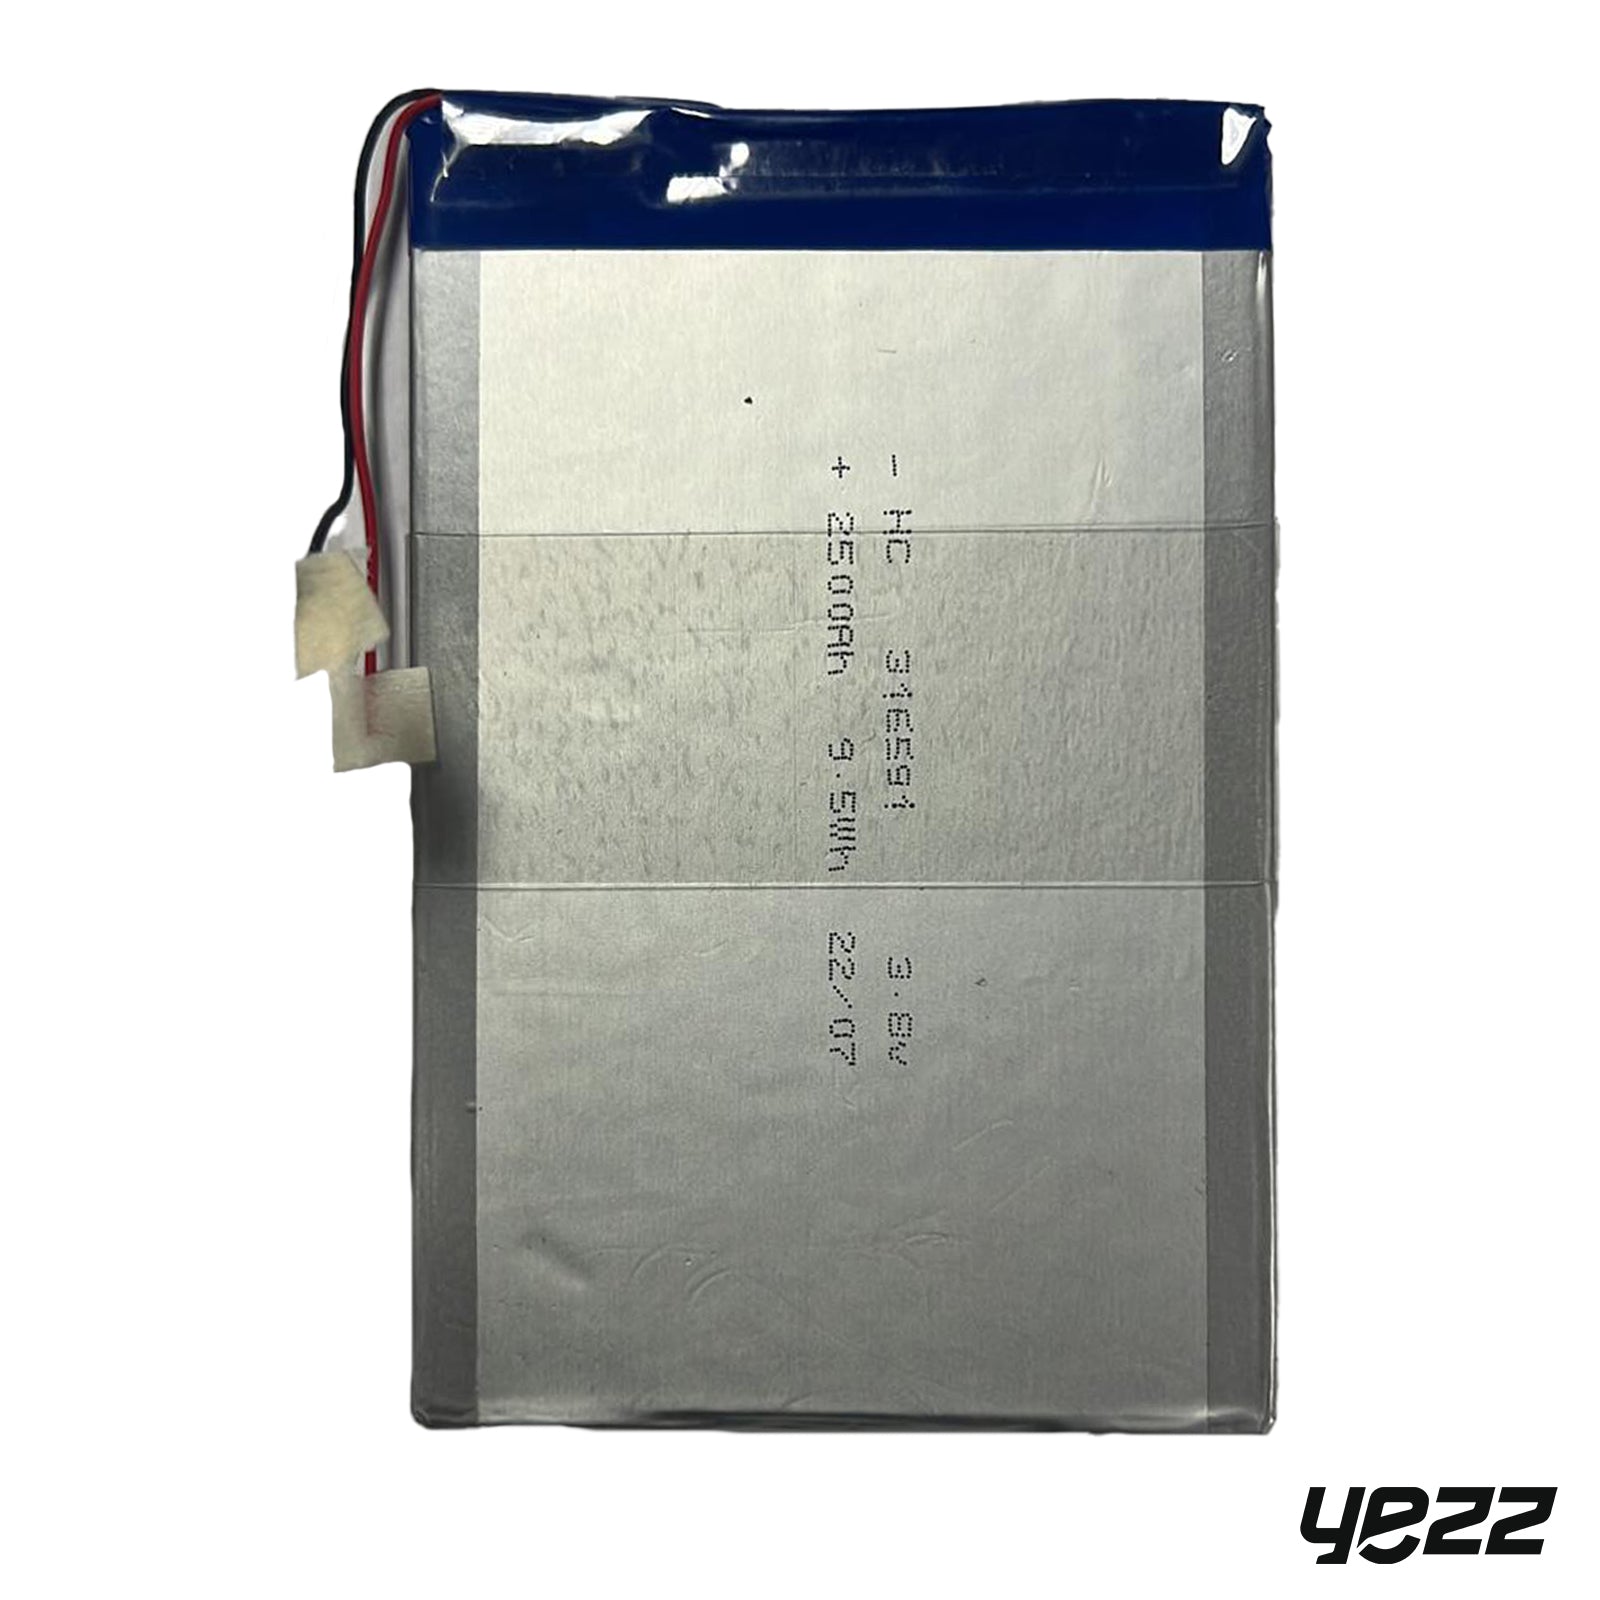 Battery (for part #EPIC3WK01S - #EPIC32WK - #EPIC3WK01 - #EPIC3W01)